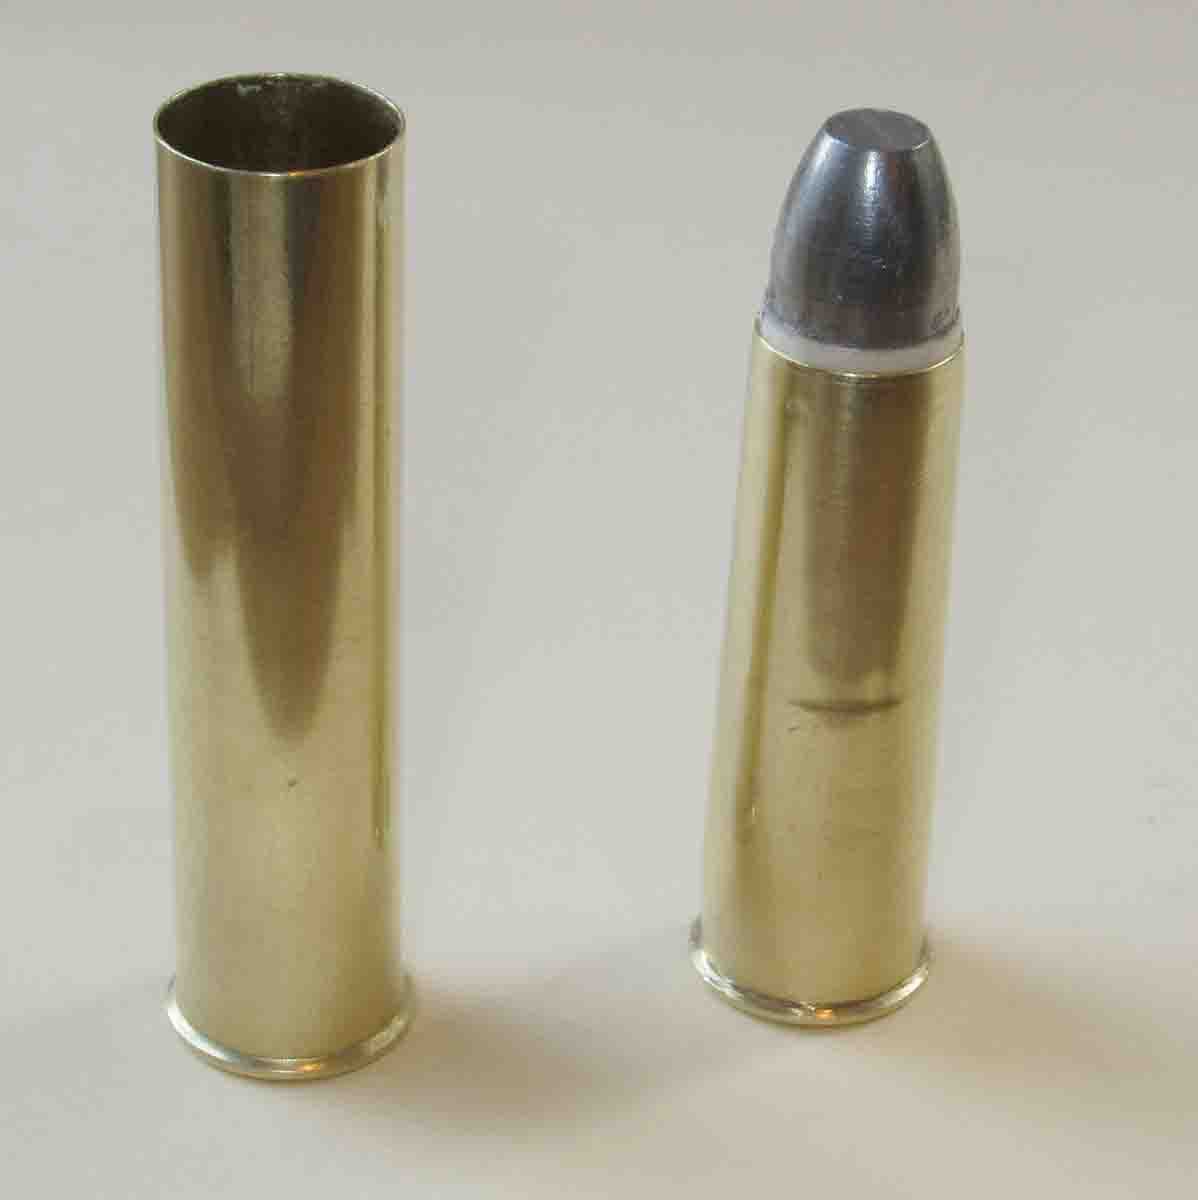 The 32-gauge parent brass fireformed case for paper-patched bullet is 1.820 inches long, with mouth inner diameter of .470 inch.